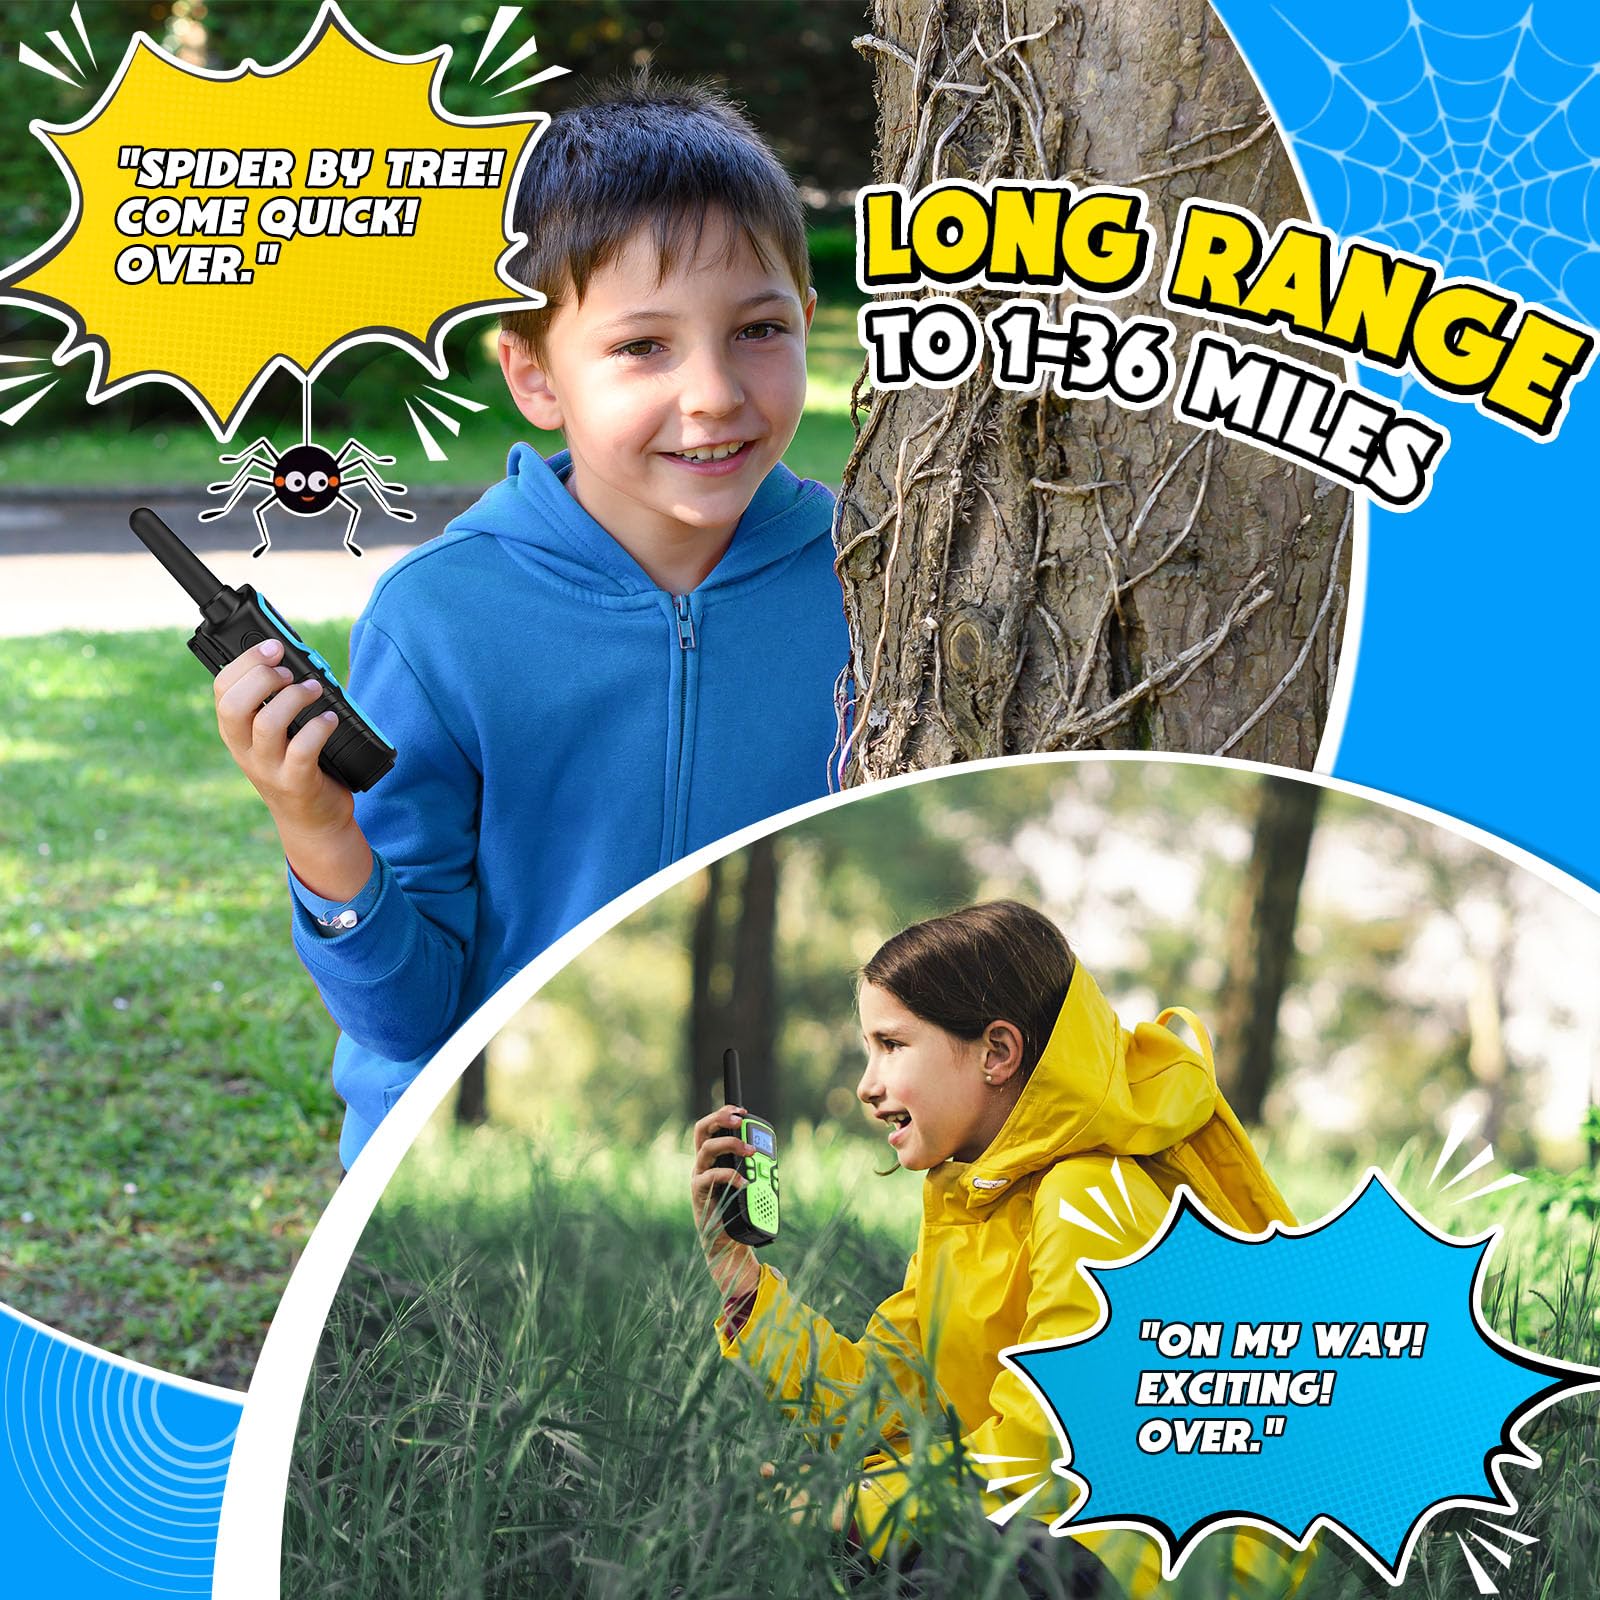 Wishouse Walkie Talkies for Kids Adults Long Range Rechargeable,Xmas Birthday Gift for 3 4 5 6 7 8 9 10 Year Old Boys Girls,Hiking Camping Gear Cool Toys 5 Pack